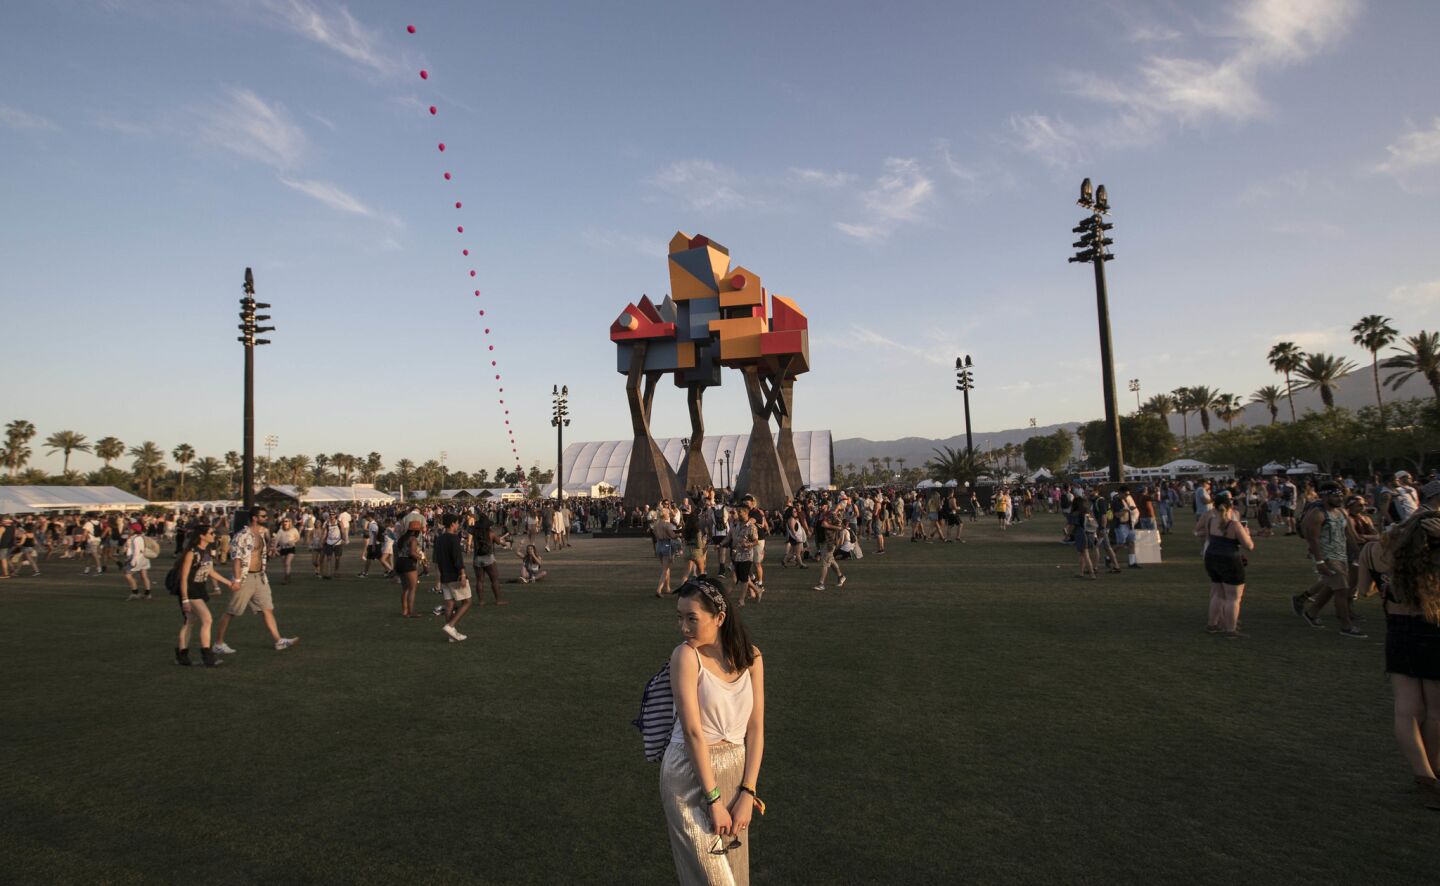 INDIO, CALIF. -- SATURDAY, APRIL 15, 2017: Art installation 'Crown Ether' provides a backdrop for photos at sunset on day two at the Coachella Music and Arts Festival in Indio, Calif., on April 15, 2017. (Brian van der Brug / Los Angeles Times)